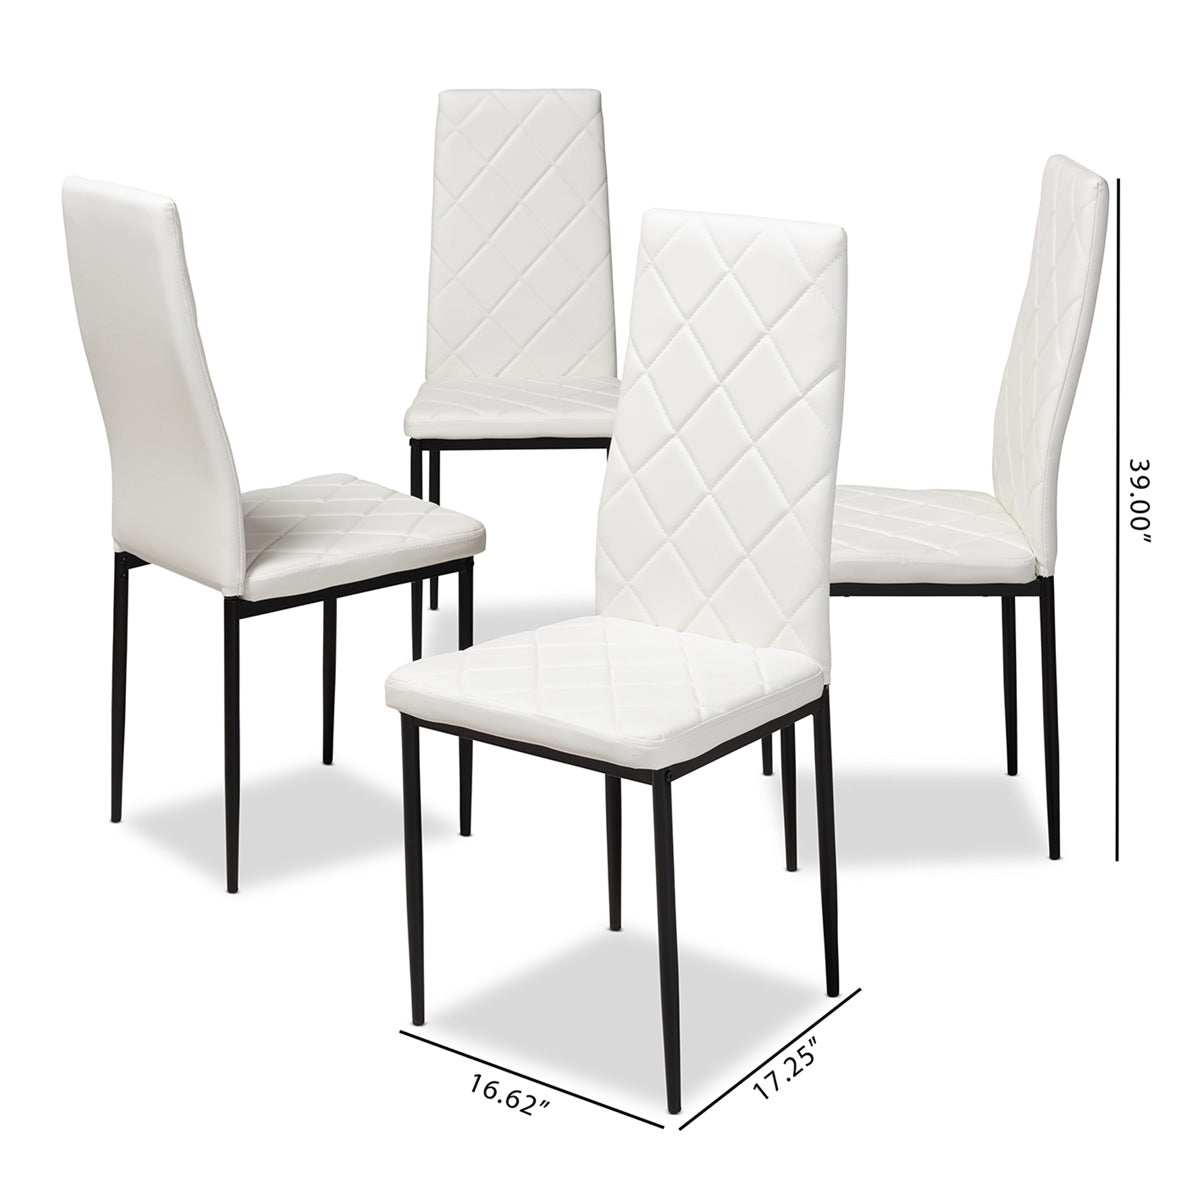 Baxton Studio Blaise Modern and Contemporary White Faux Leather Upholstered Dining Chair (Set of 4) Baxton Studio-dining chair-Minimal And Modern - 5